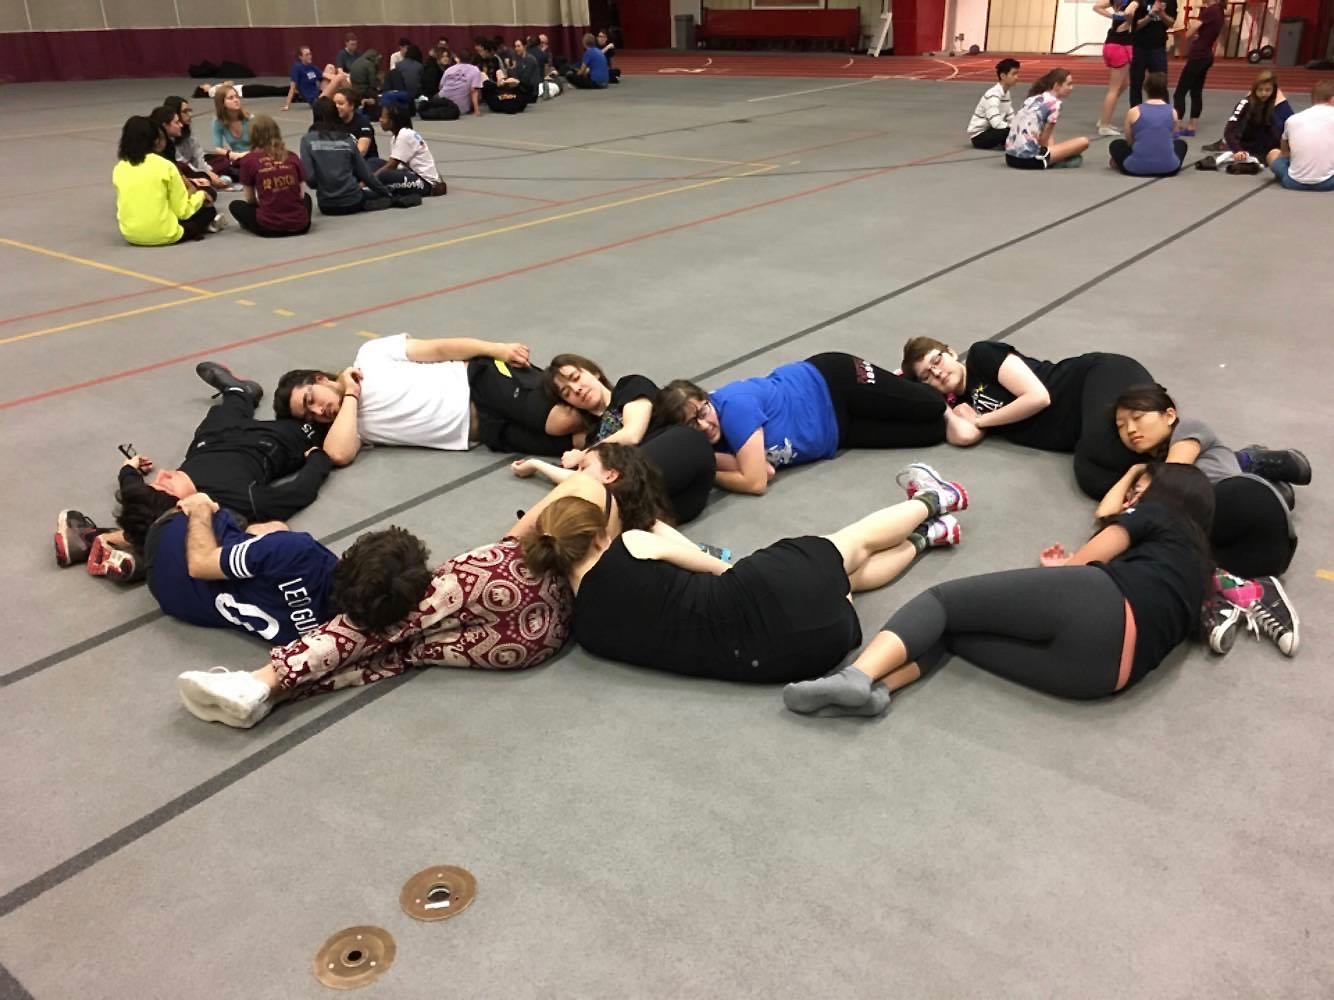 Students nap together before Kuvia exercises begin.